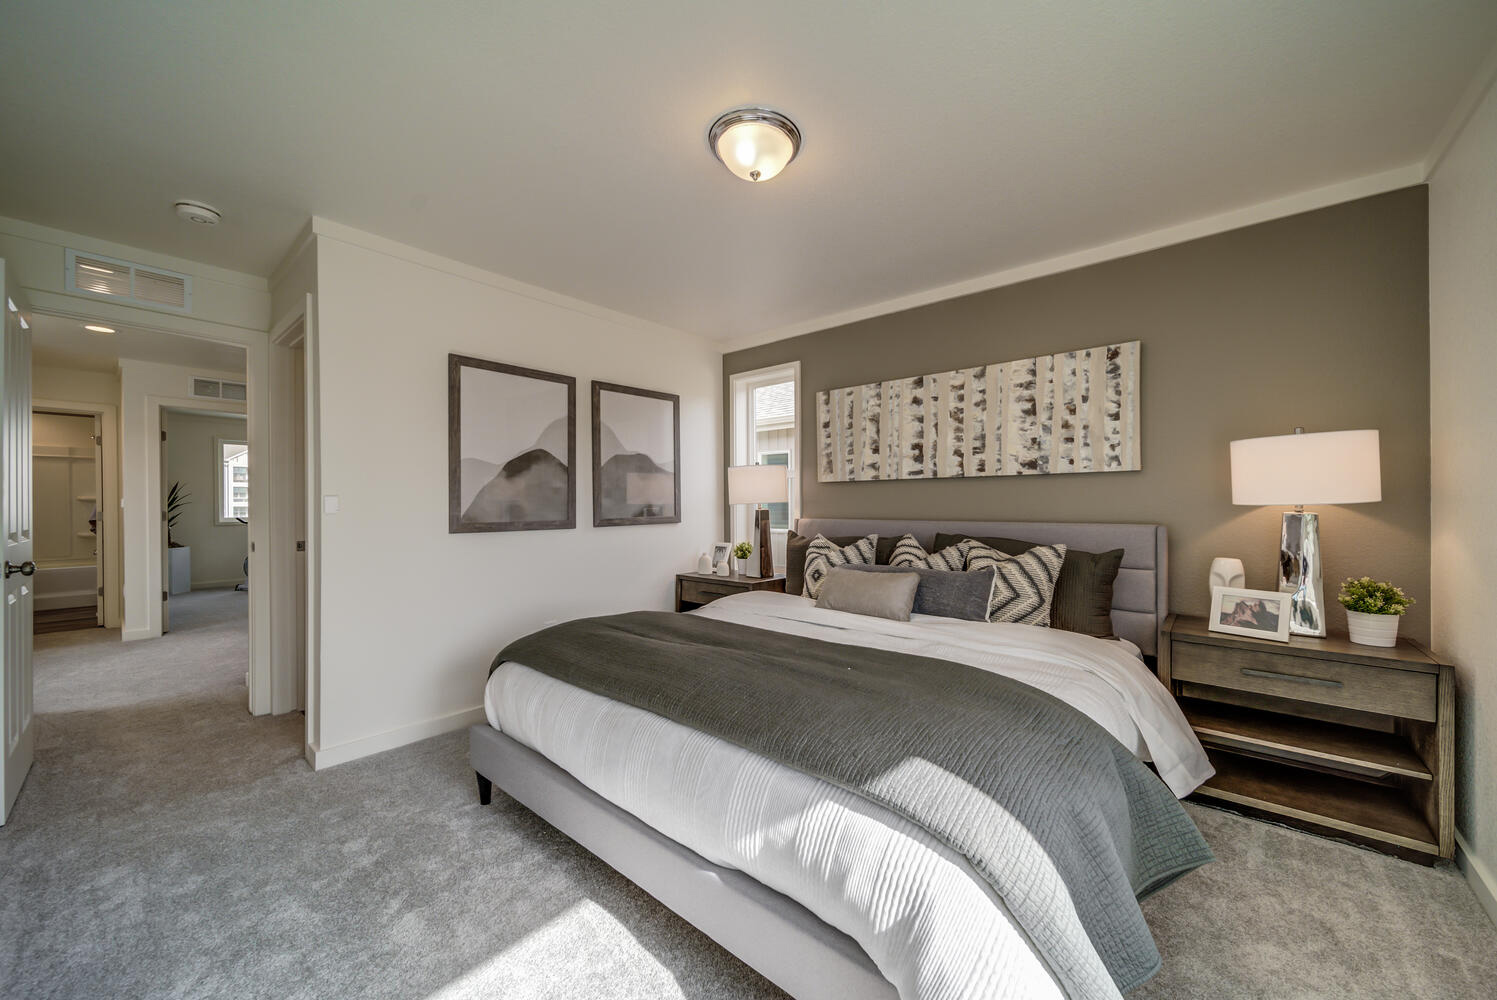 Large, beautiful On2 primary bedrooms provide the perfect place to rest and relax.